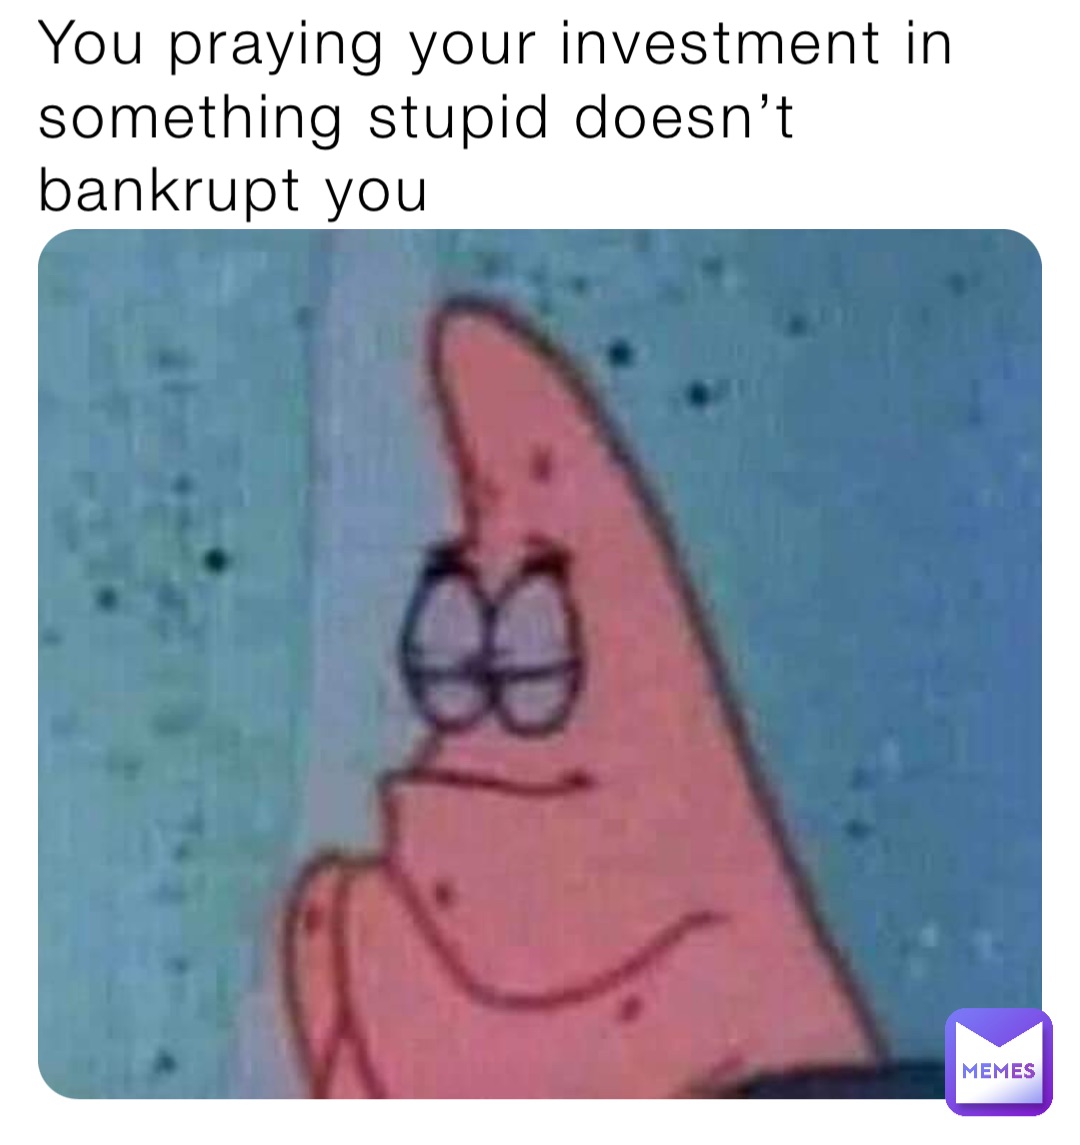 You praying your investment in something stupid doesn’t bankrupt you